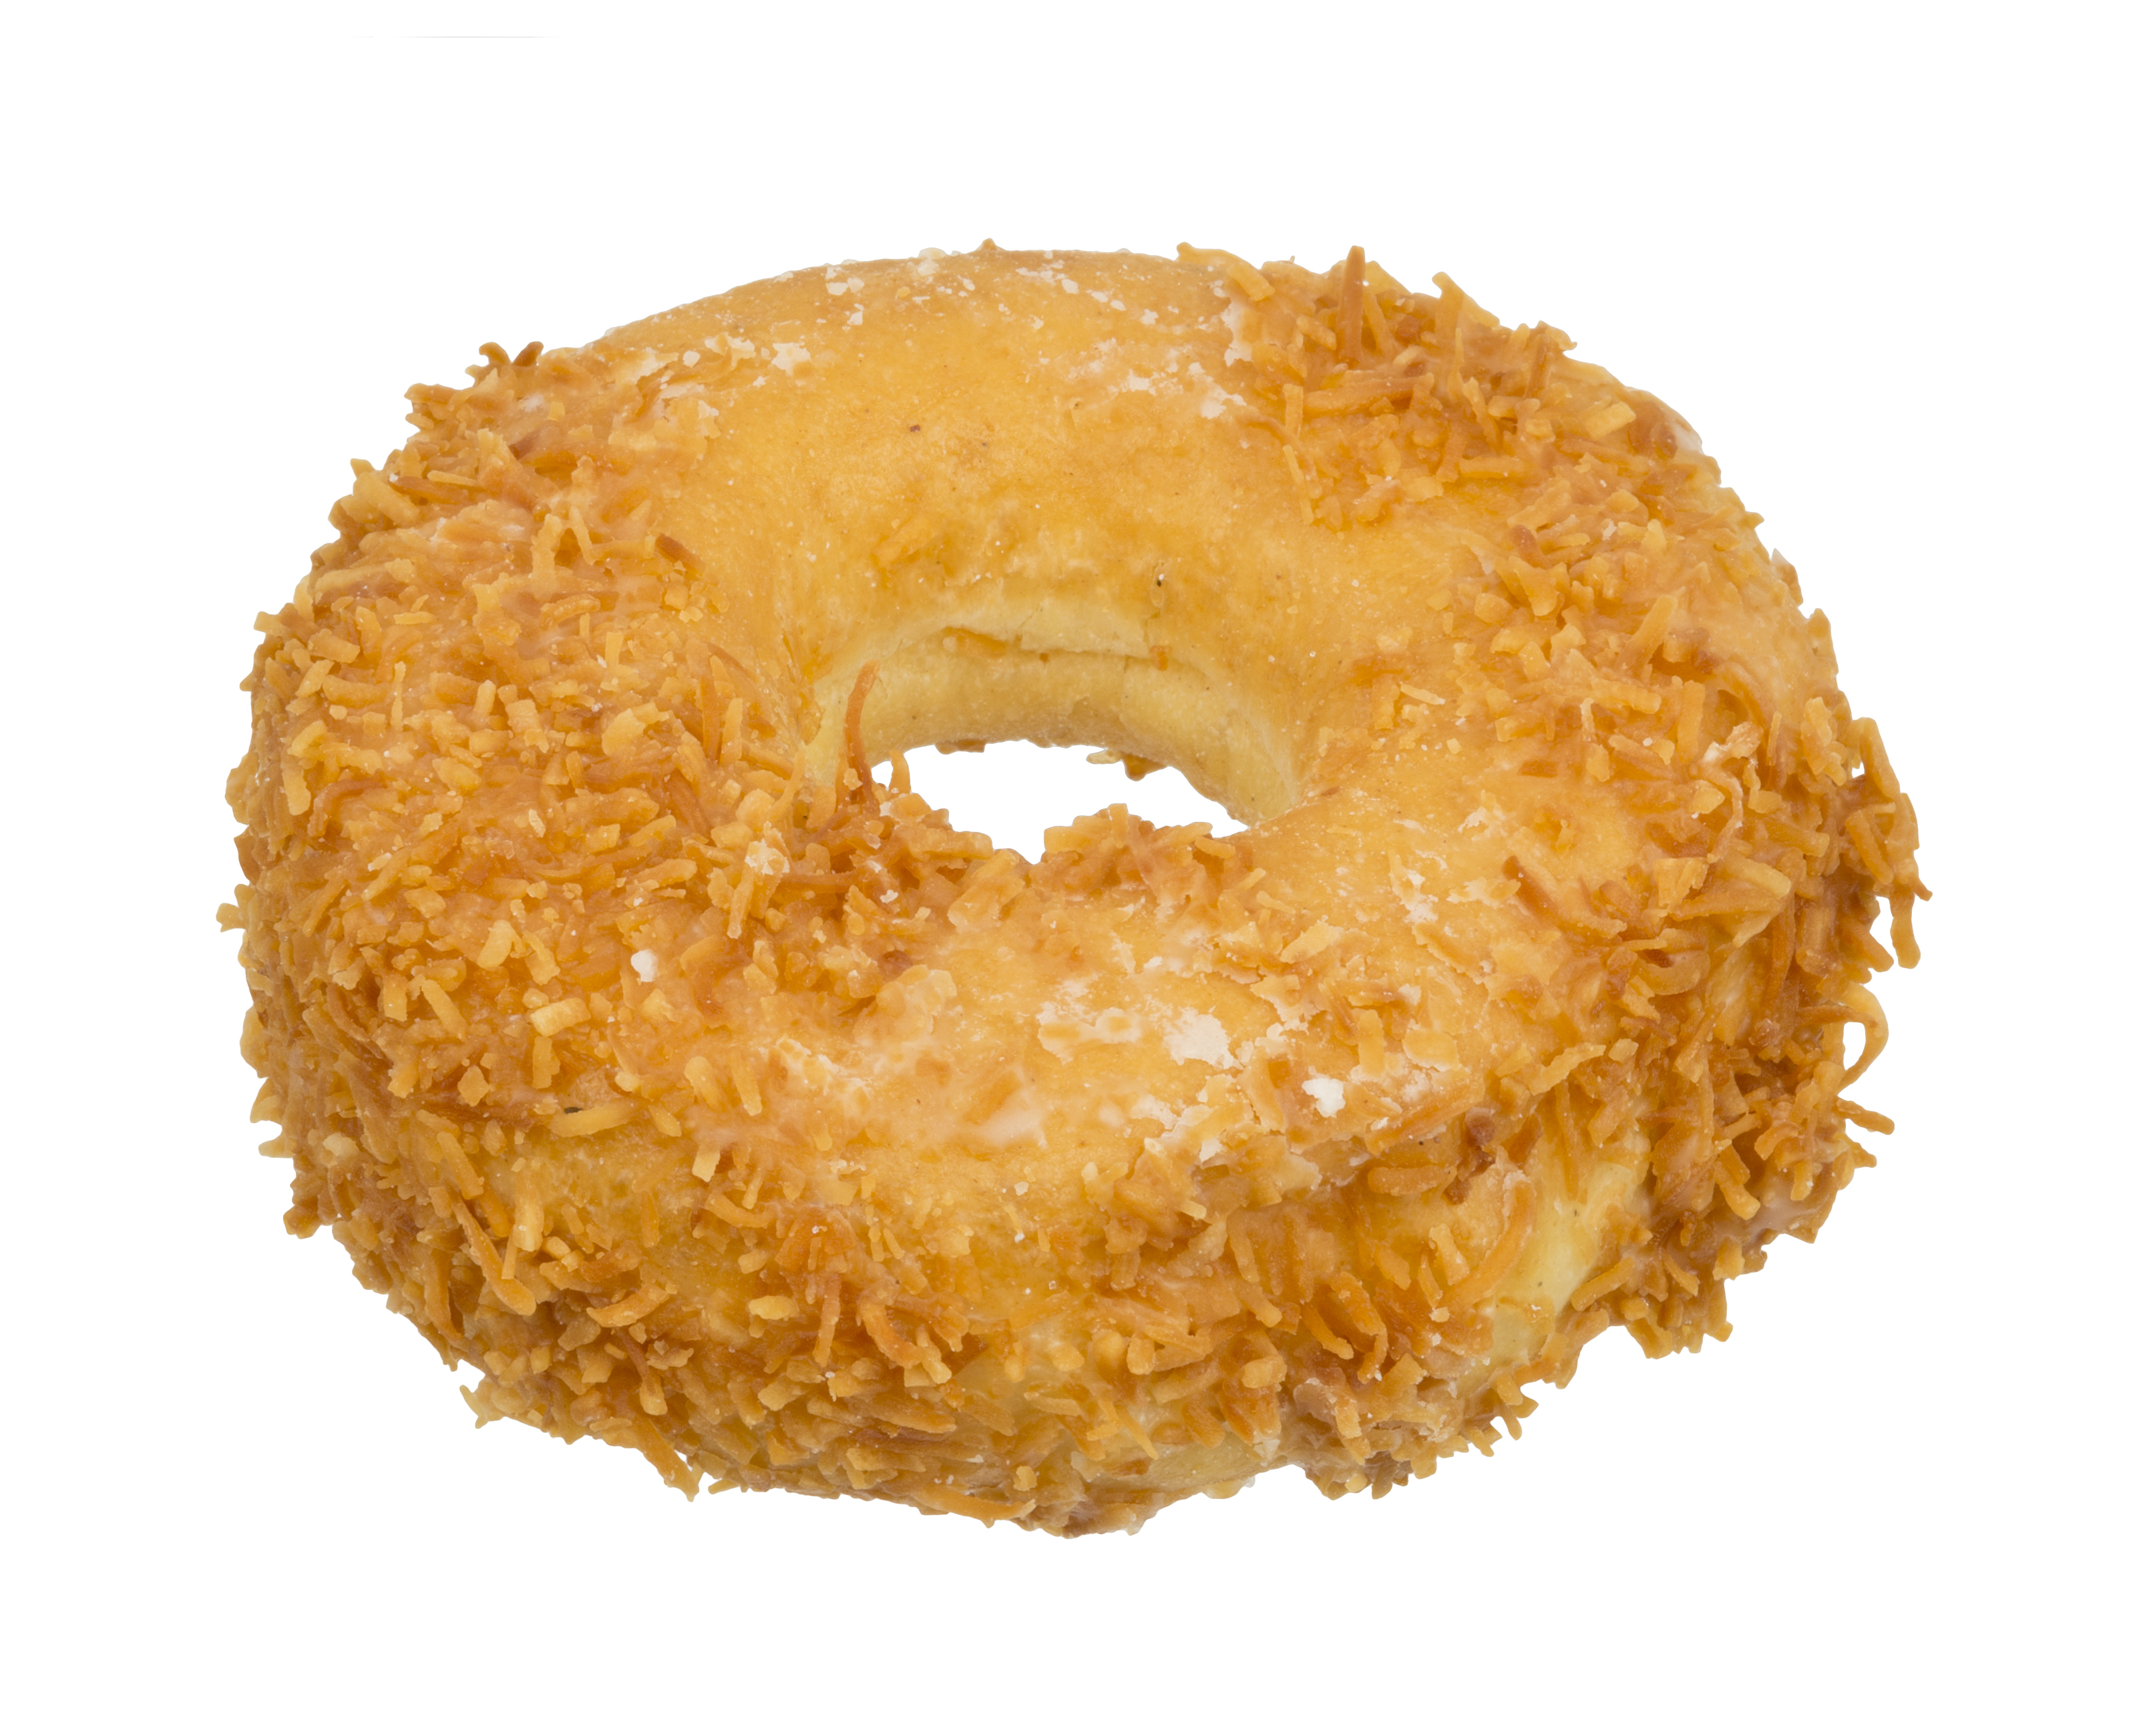 Peter-Pan-Bakery-Donut-Toasted-Coconut